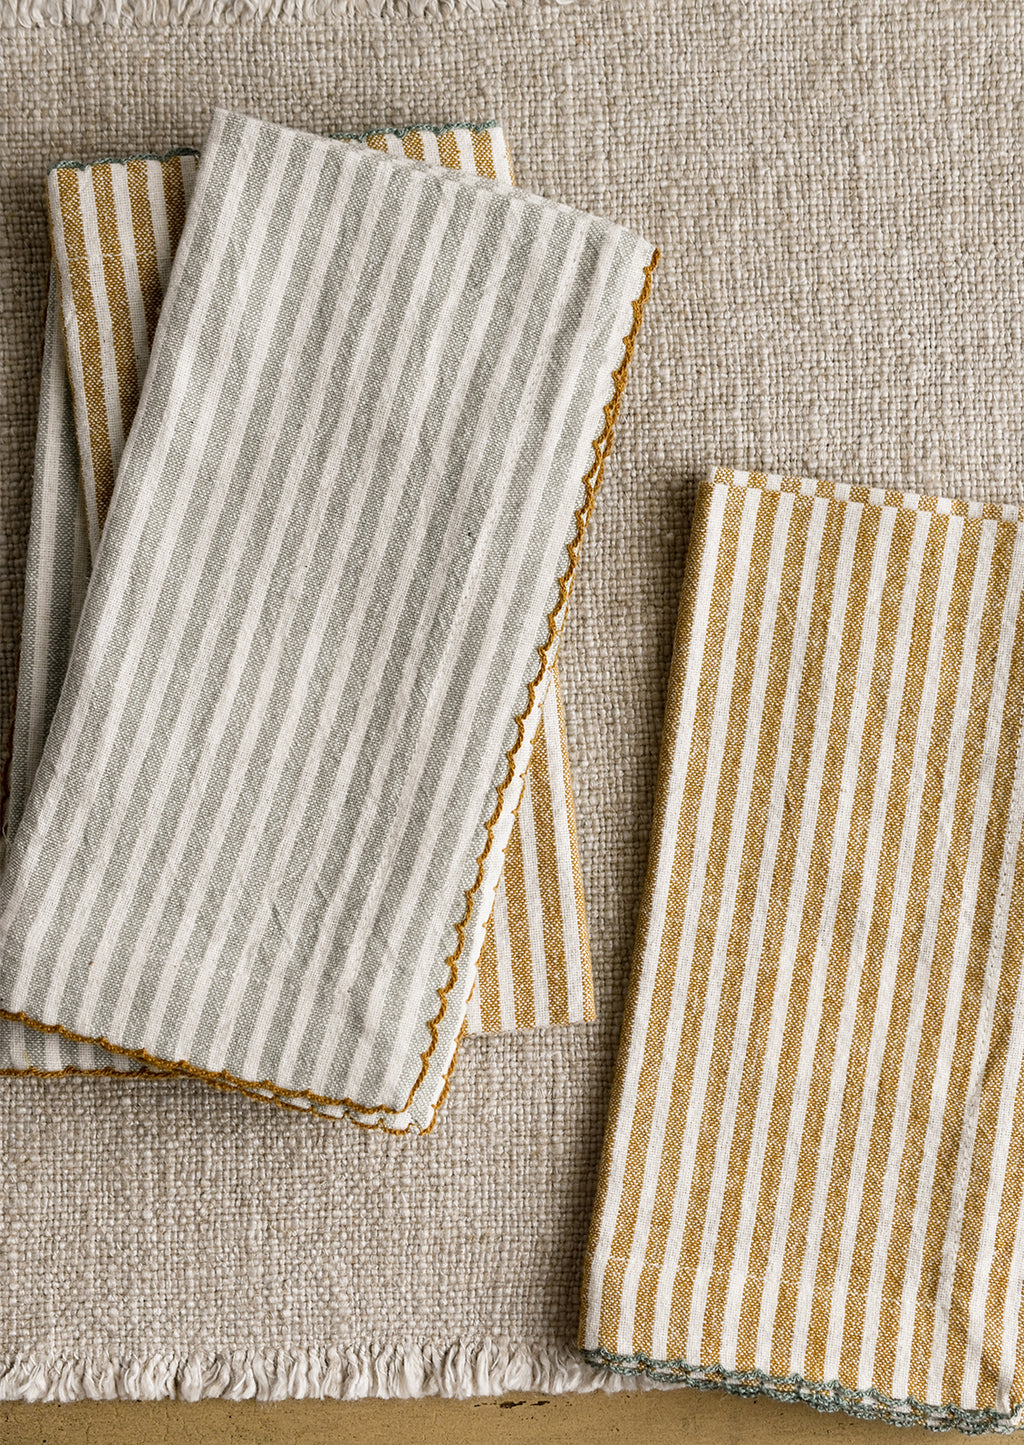 1: A set of four striped dinner napkins in grey-blue and brown stripes.